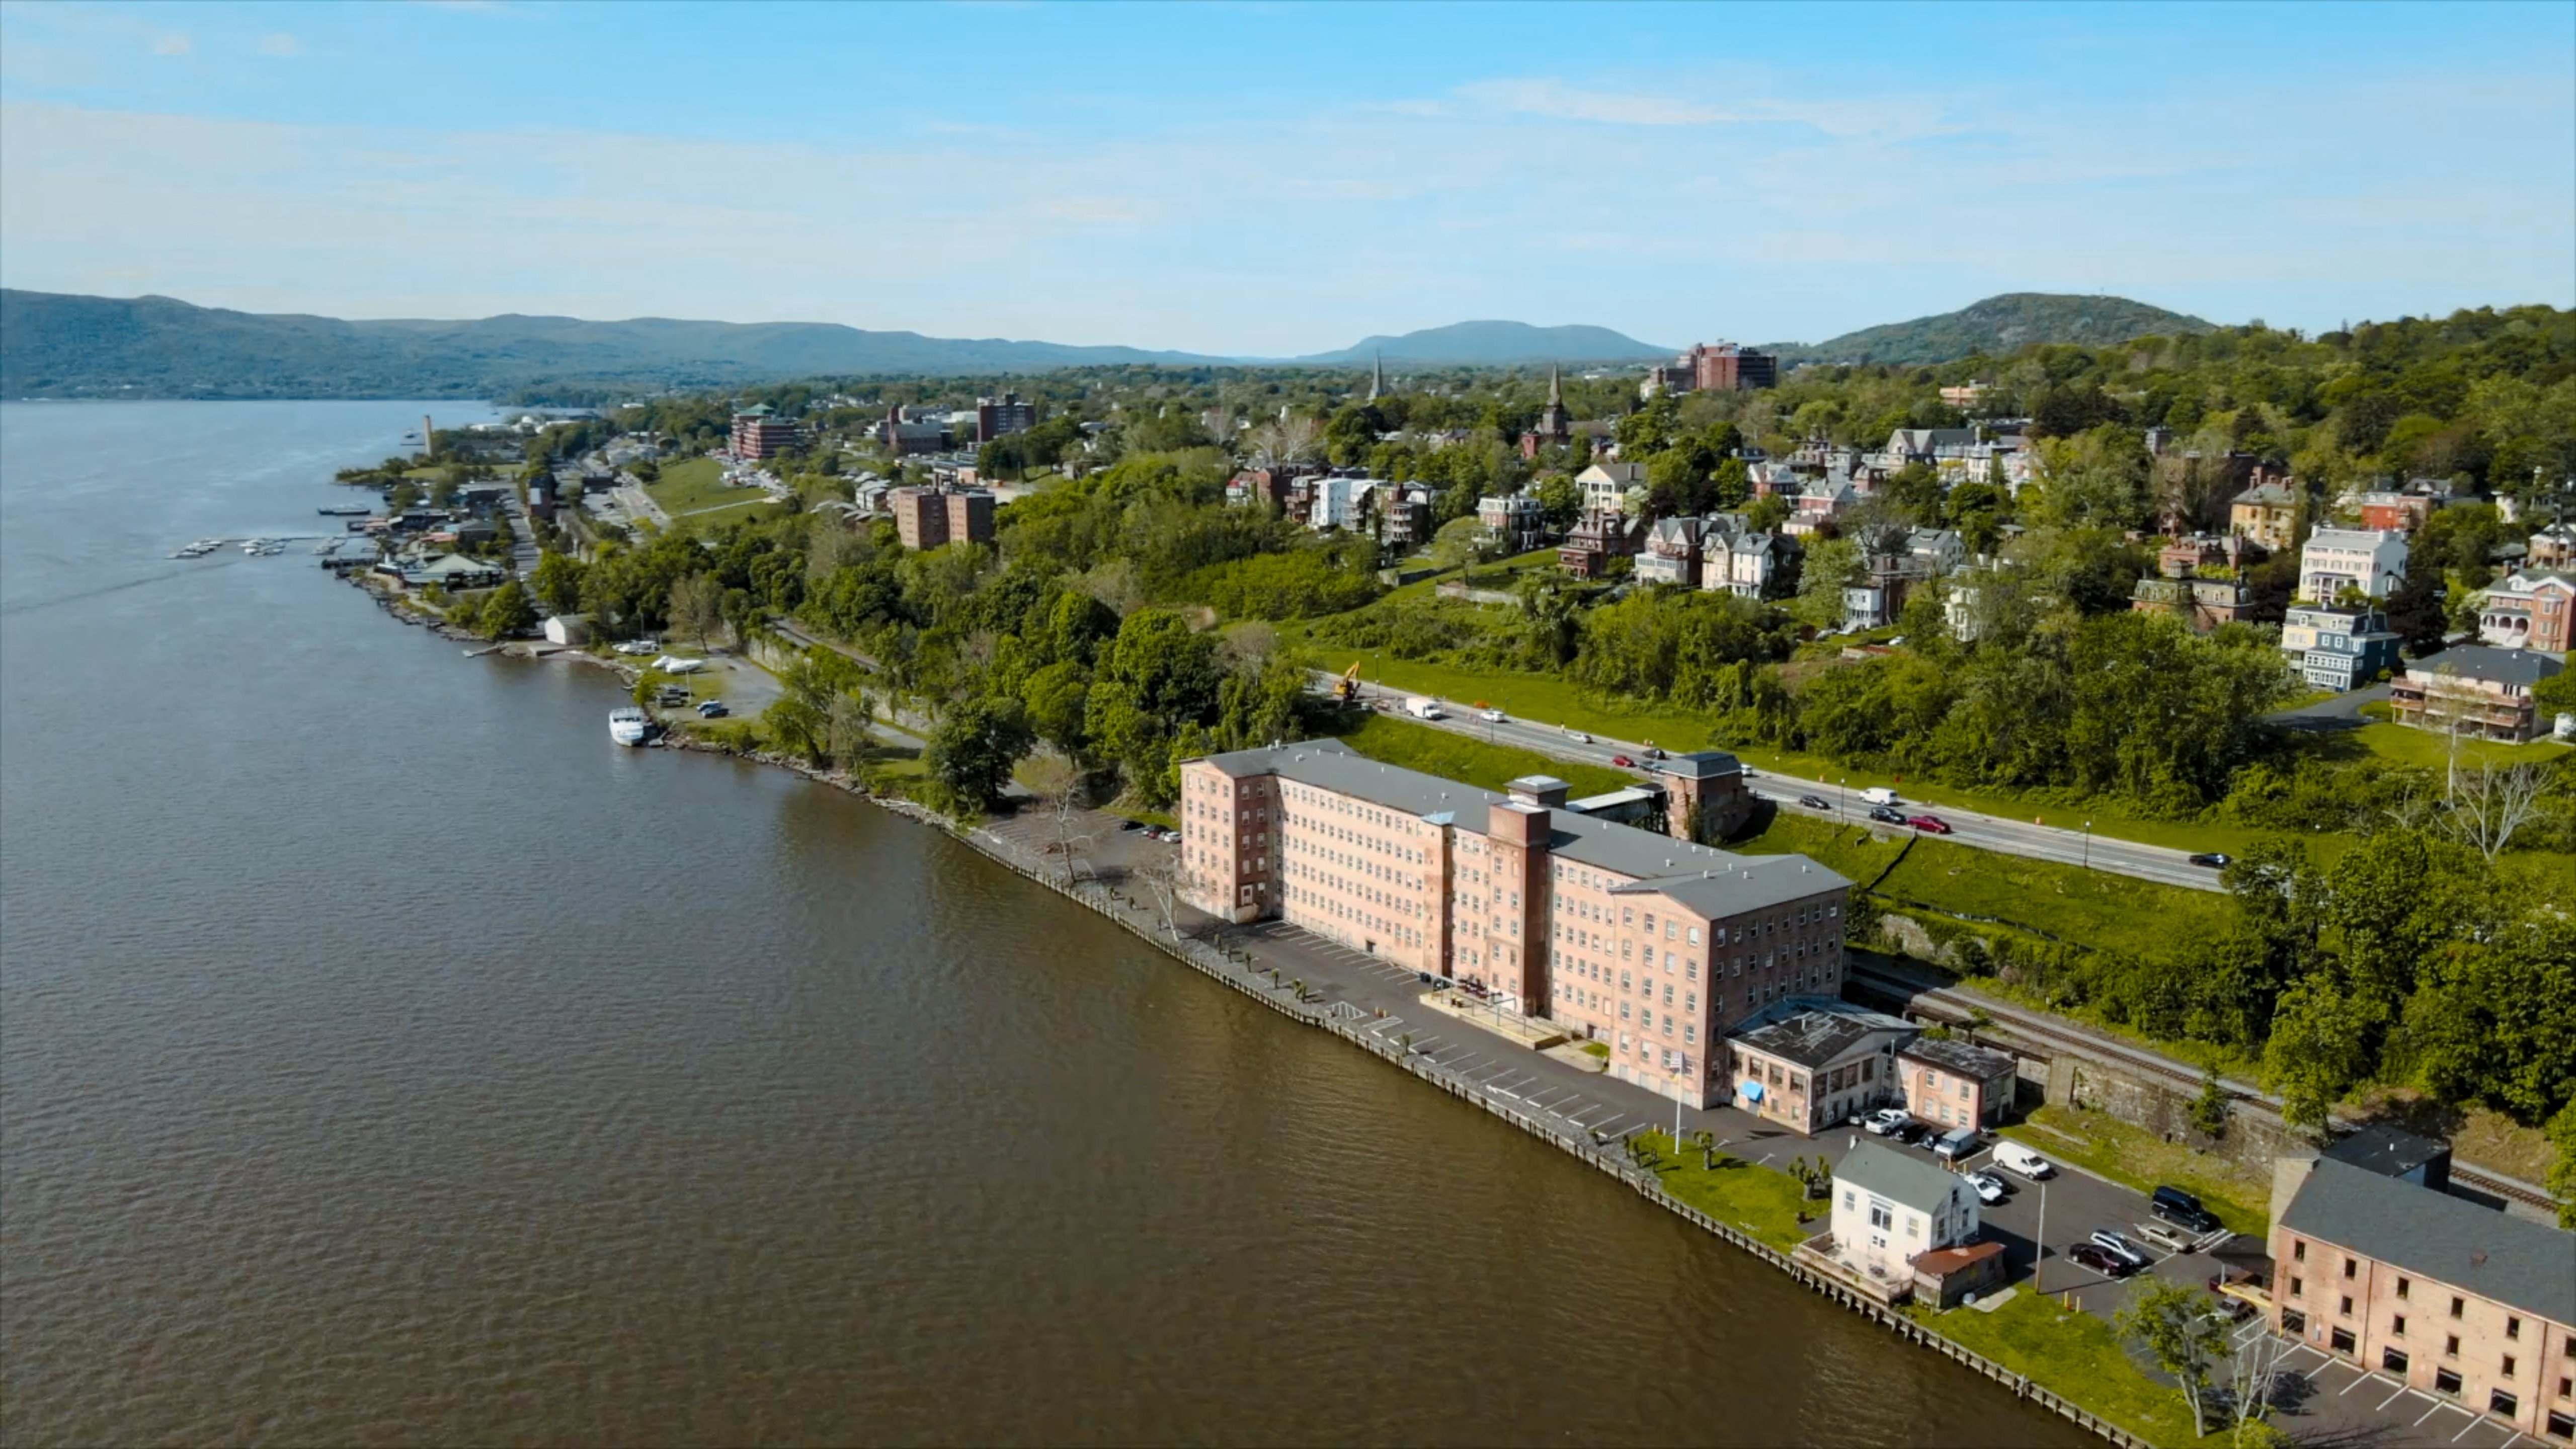 Avison Young markets two substantial waterfront development properties in New York’s Hudson Valley